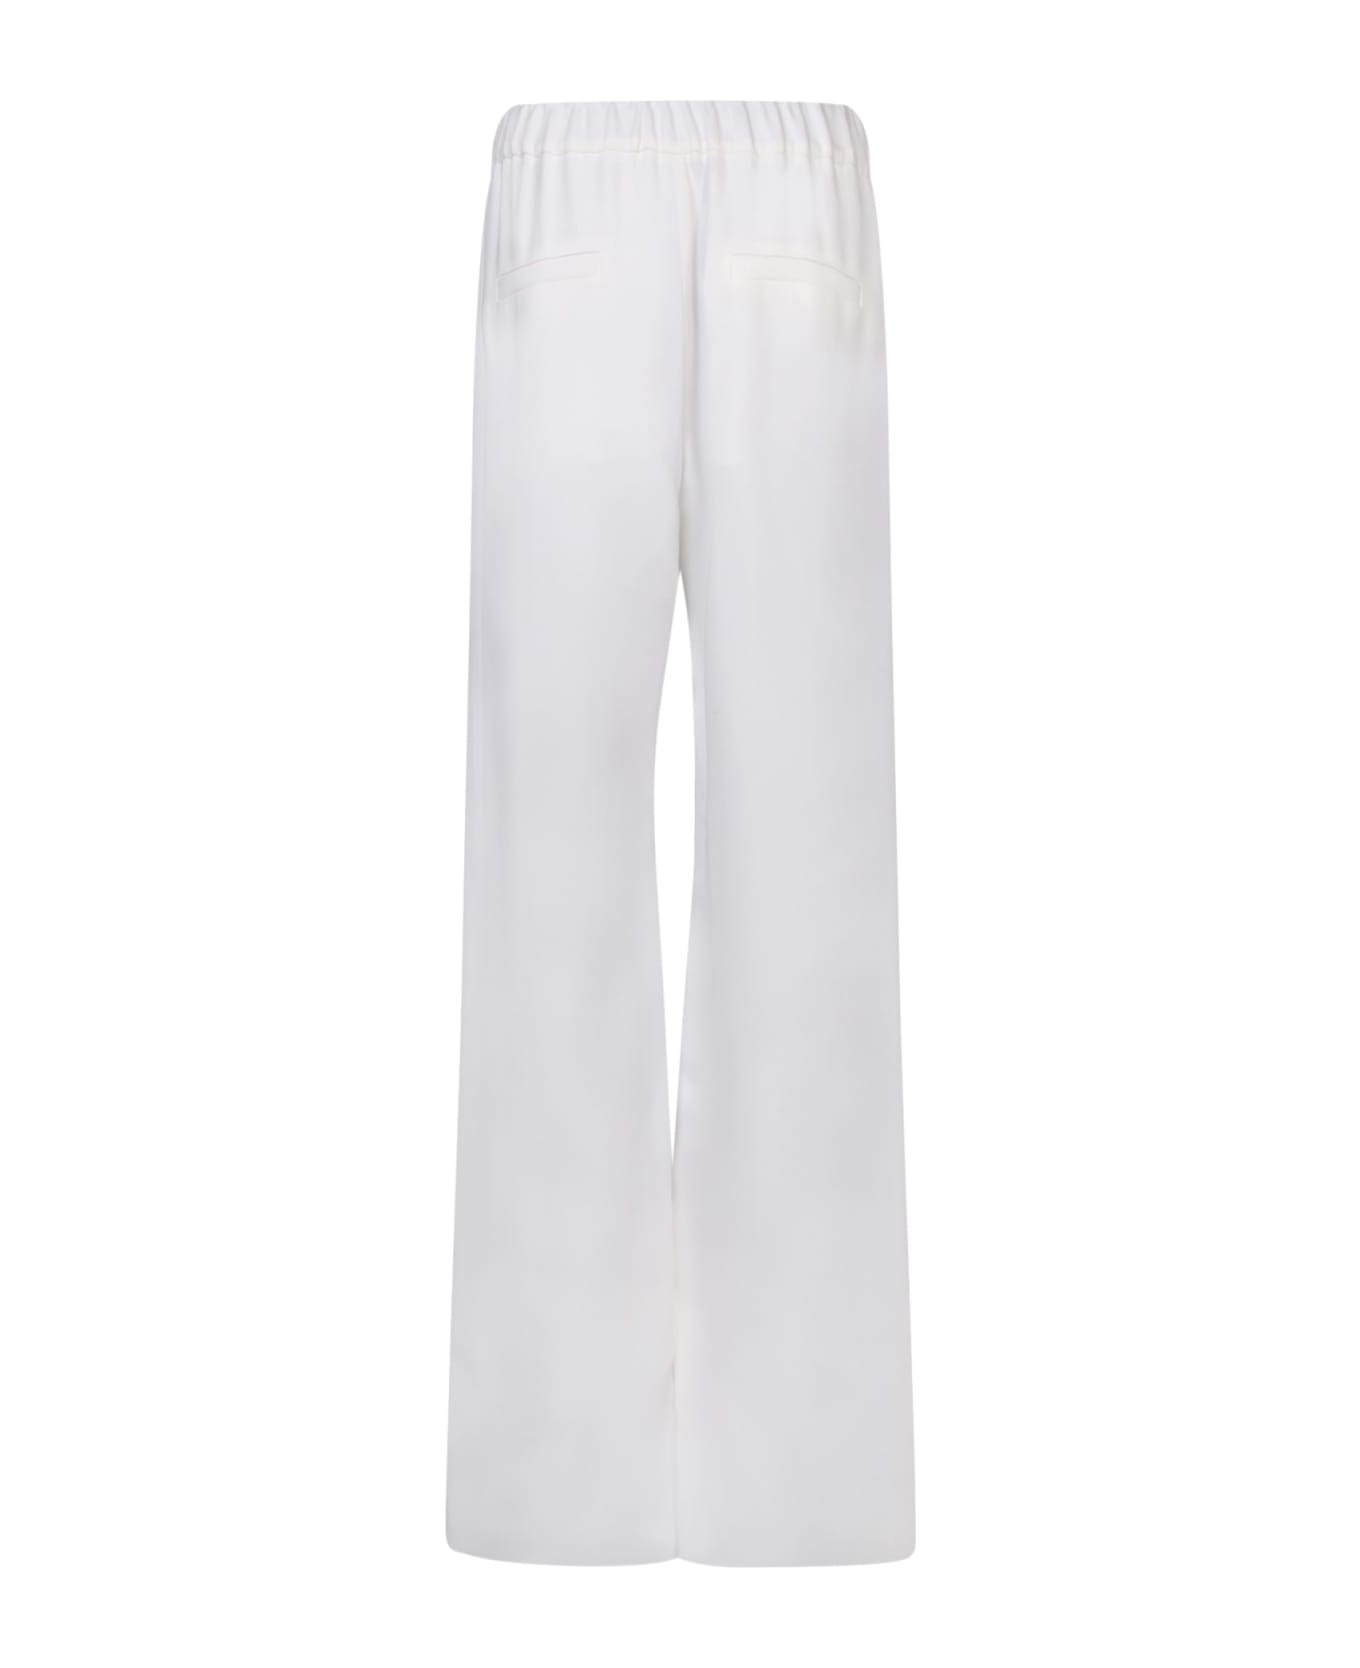 Valentino Cady Ivory Trousers - White